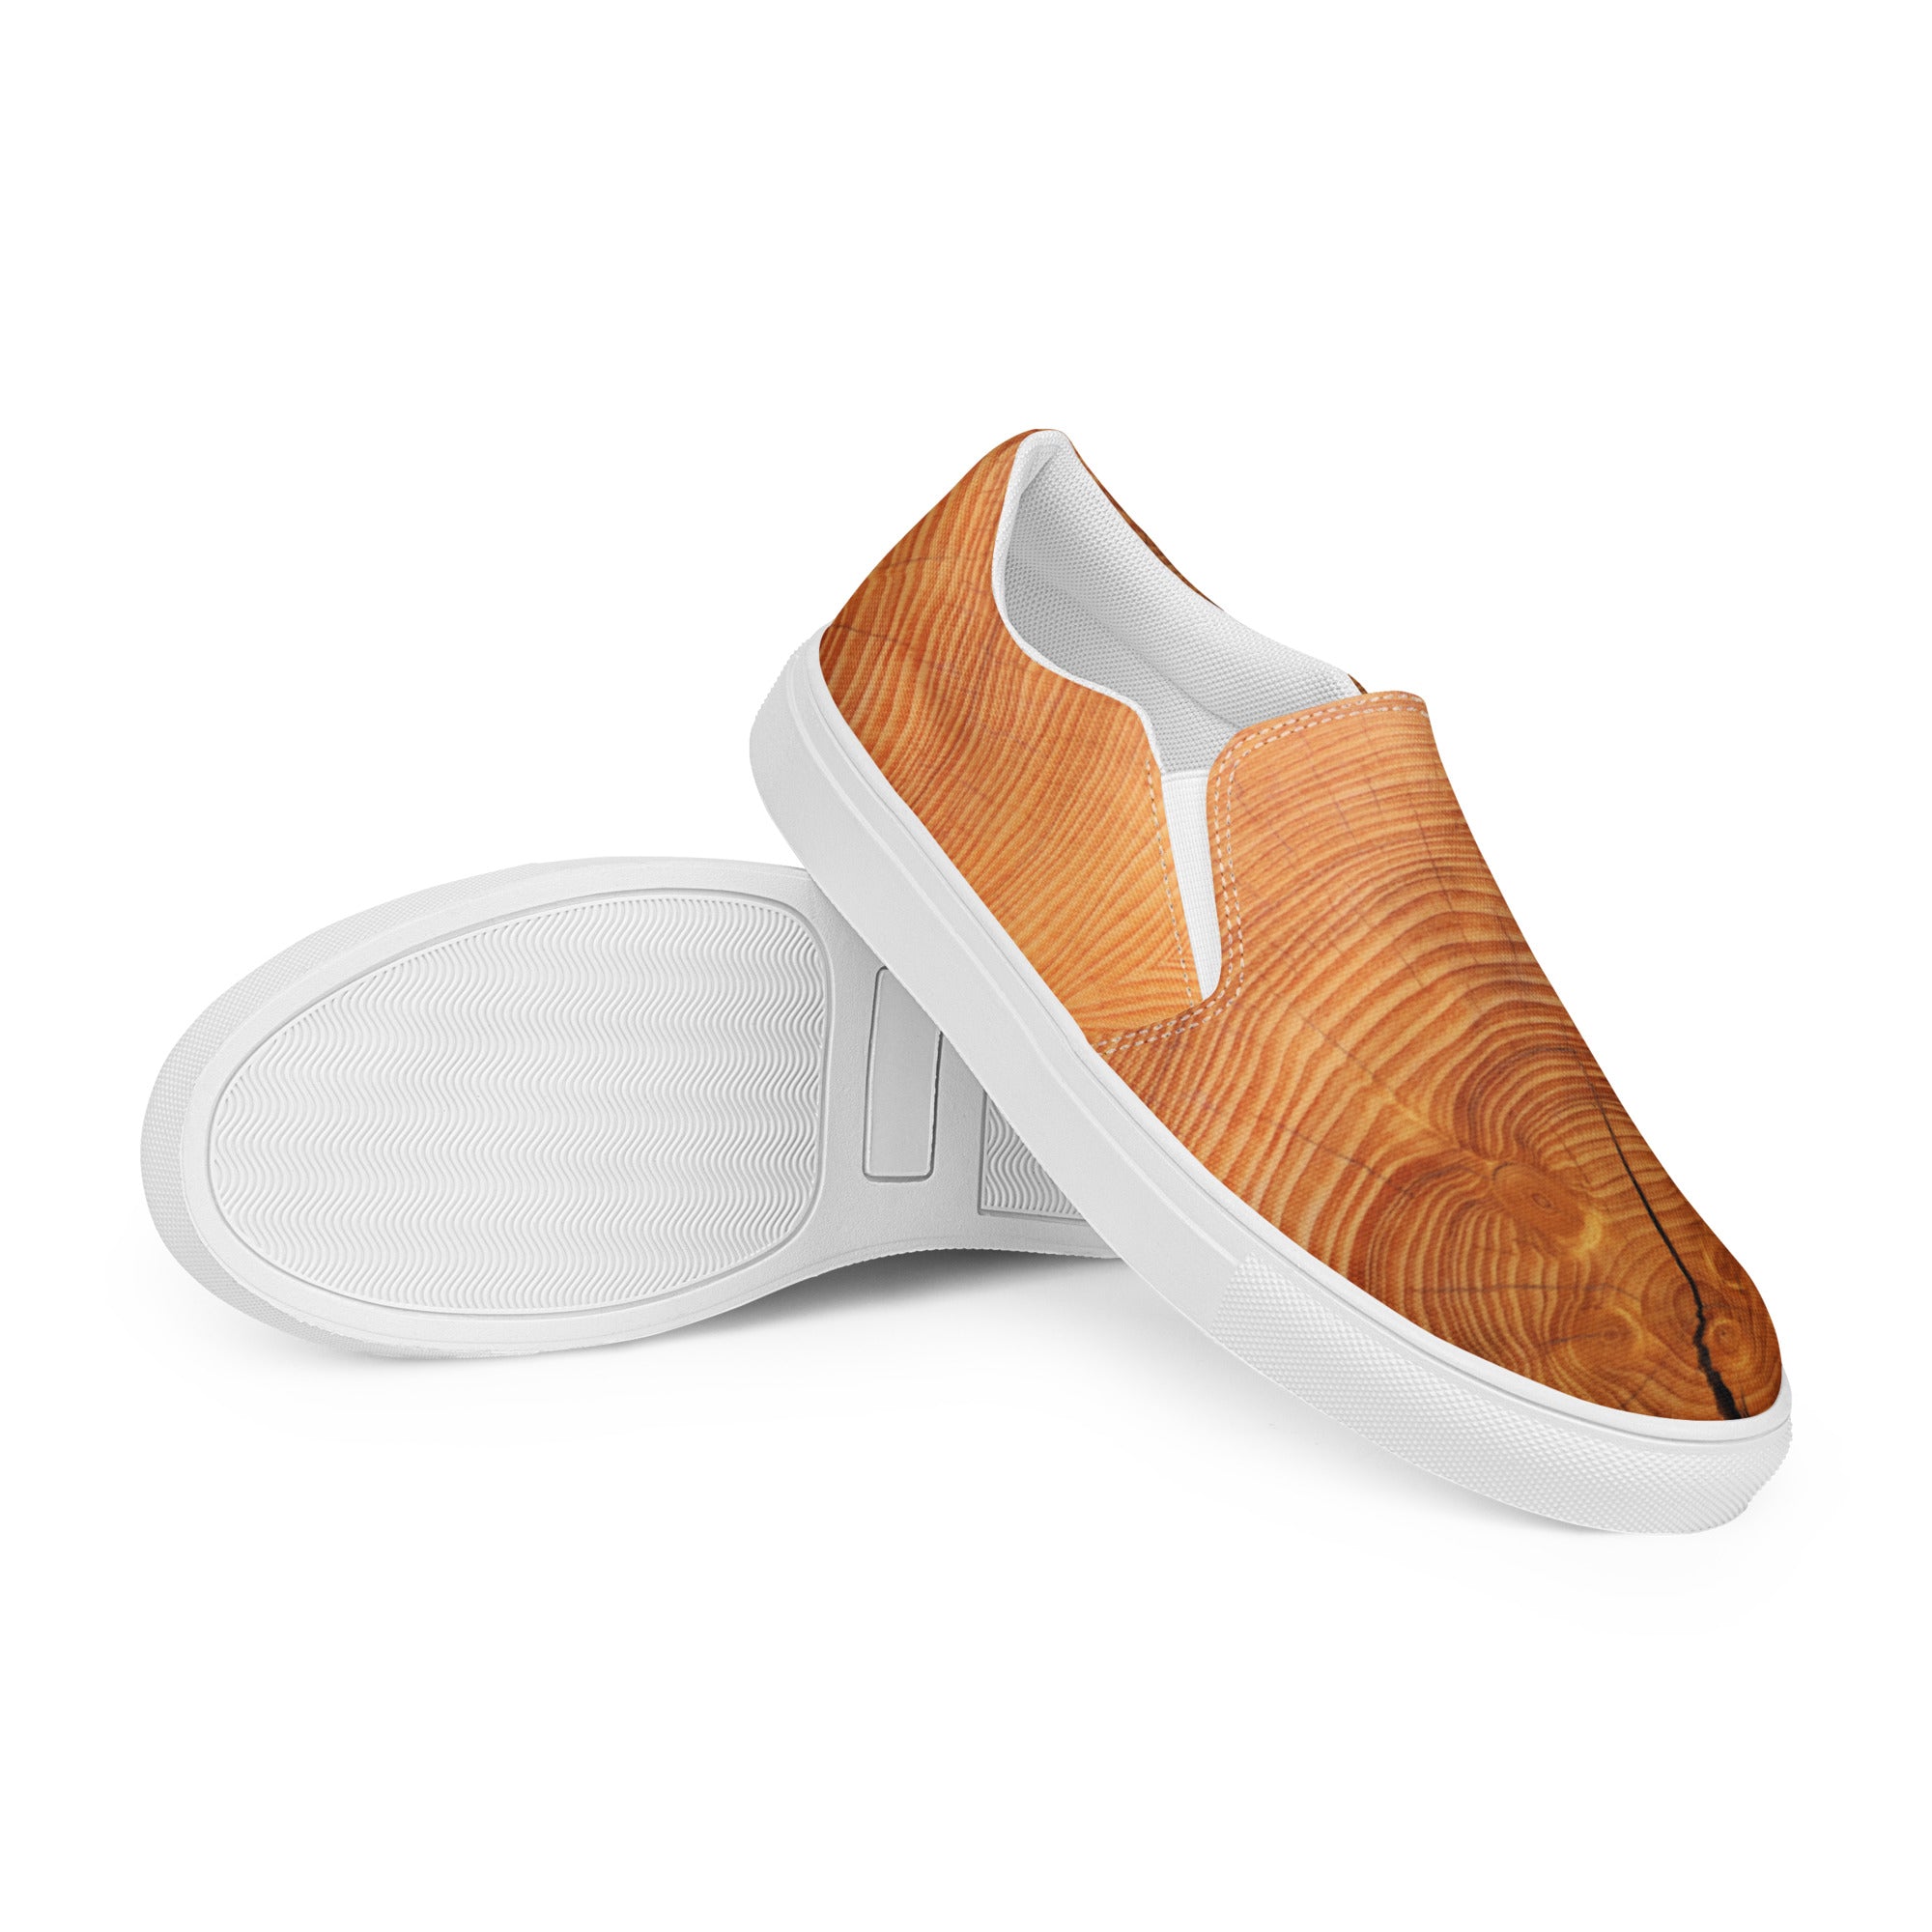 Cracked Wood Pattern Men’s Slip-on Canvas Shoes